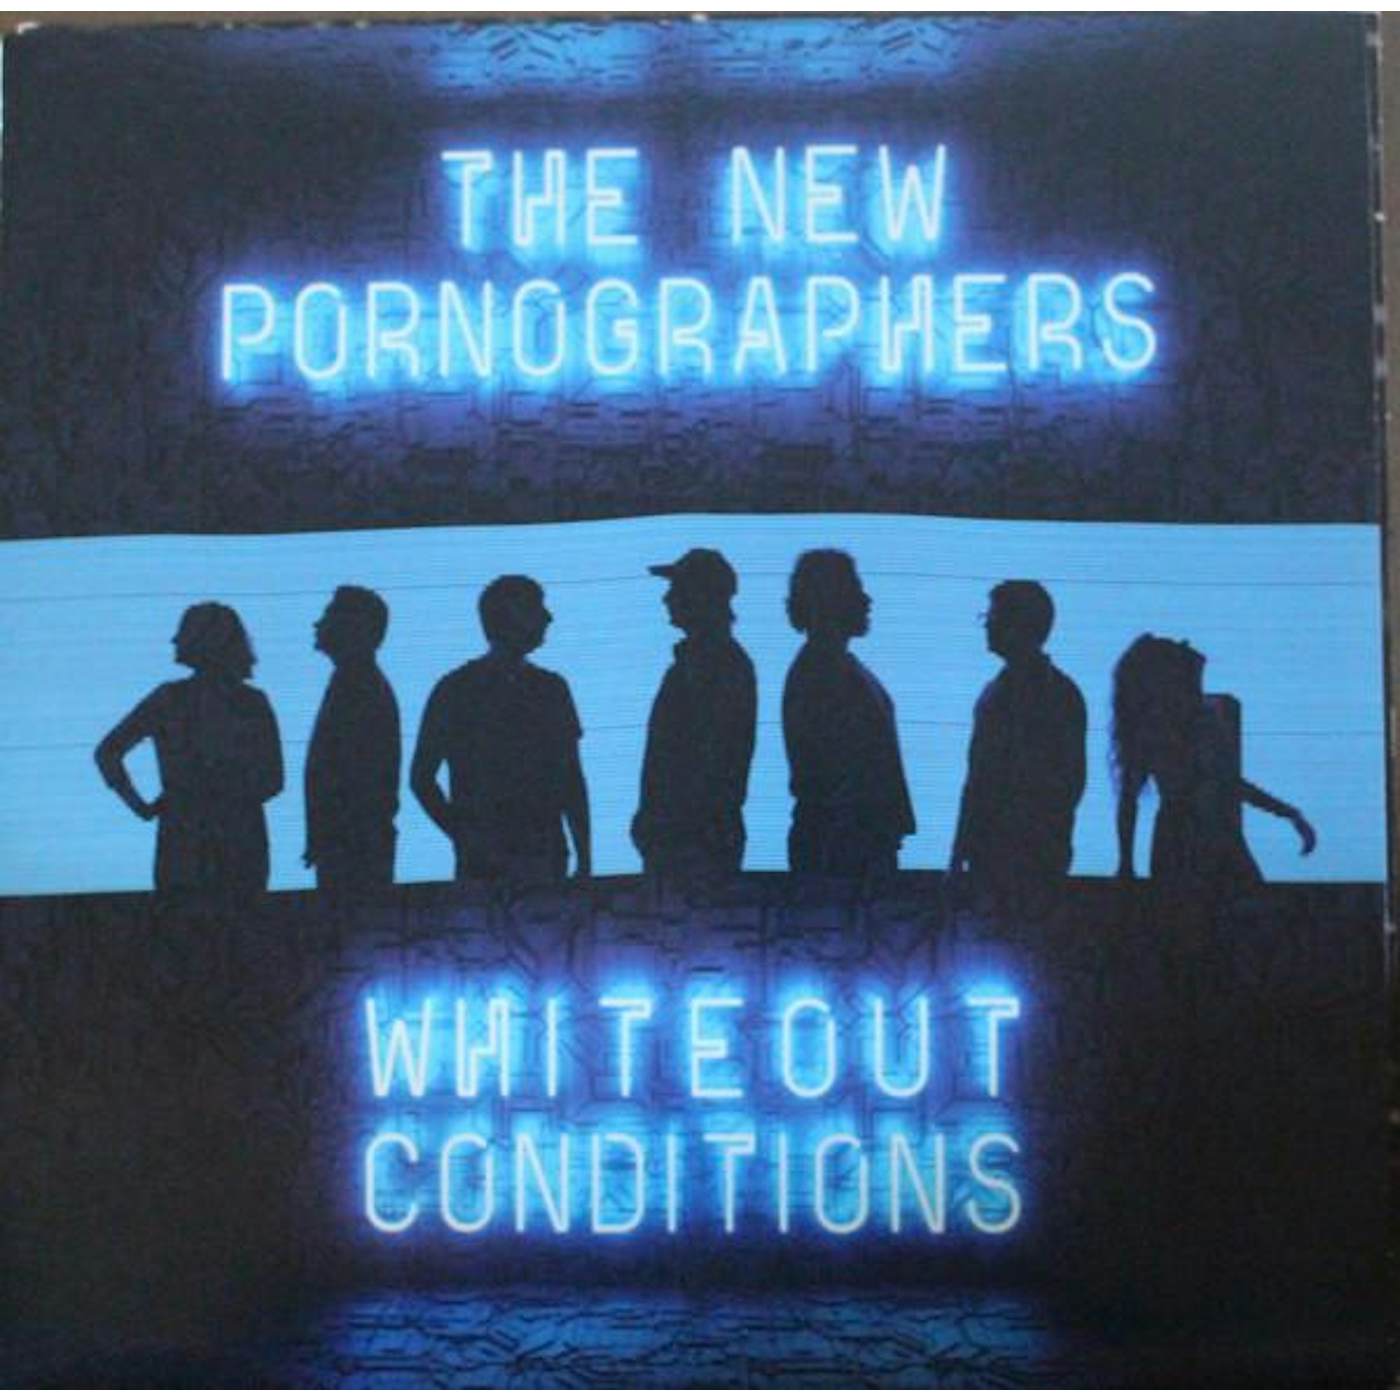 The New Pornographers Whiteout Conditions Vinyl Record